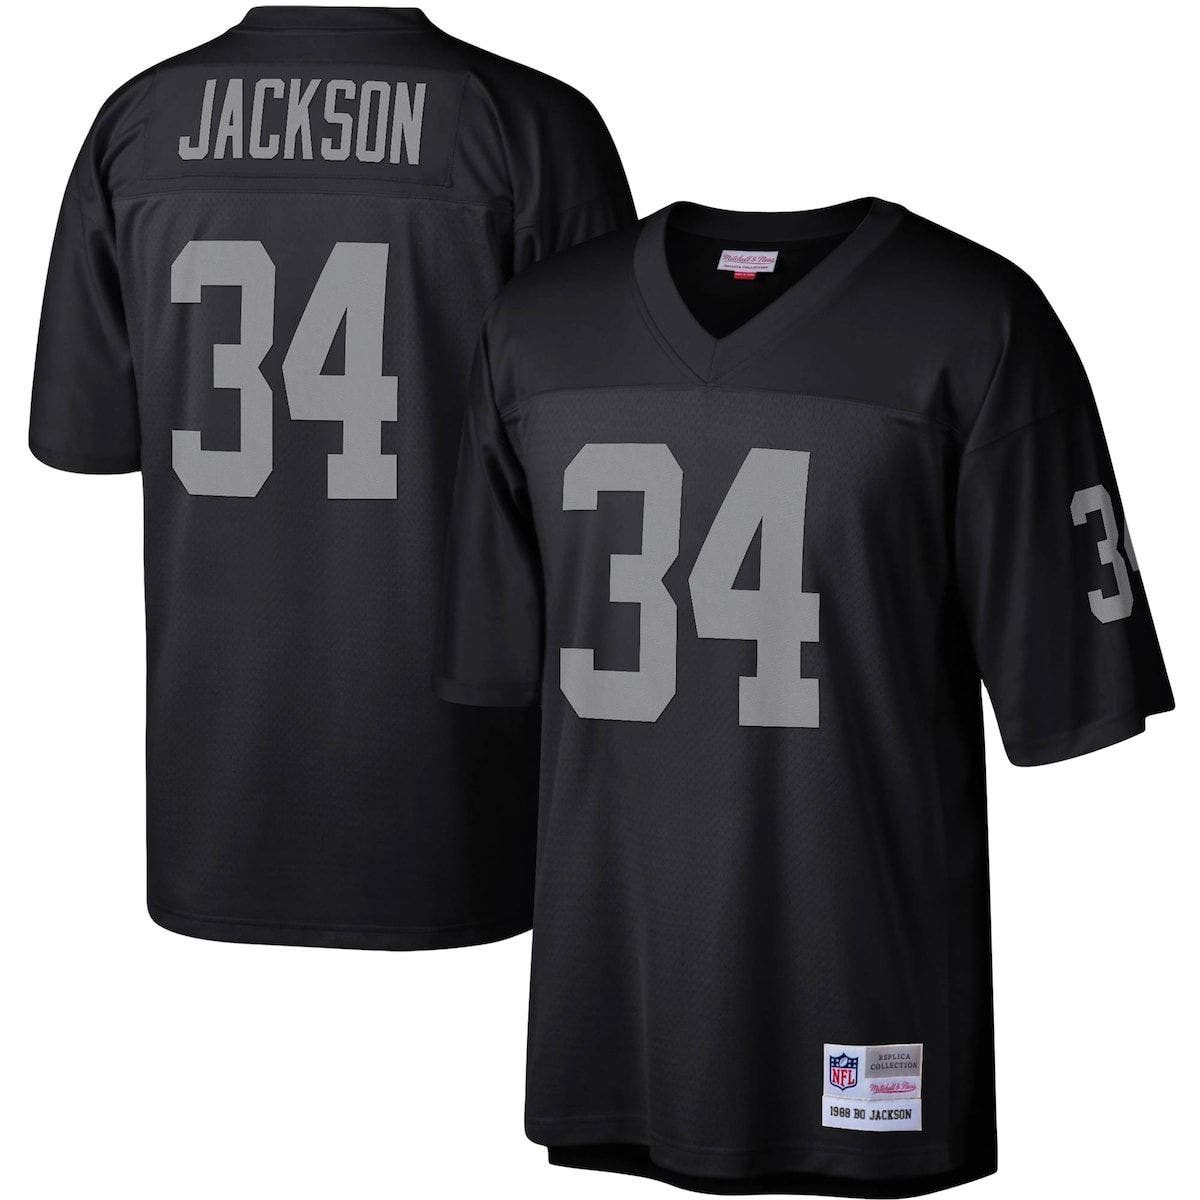 Ray Jacobs replica jersey